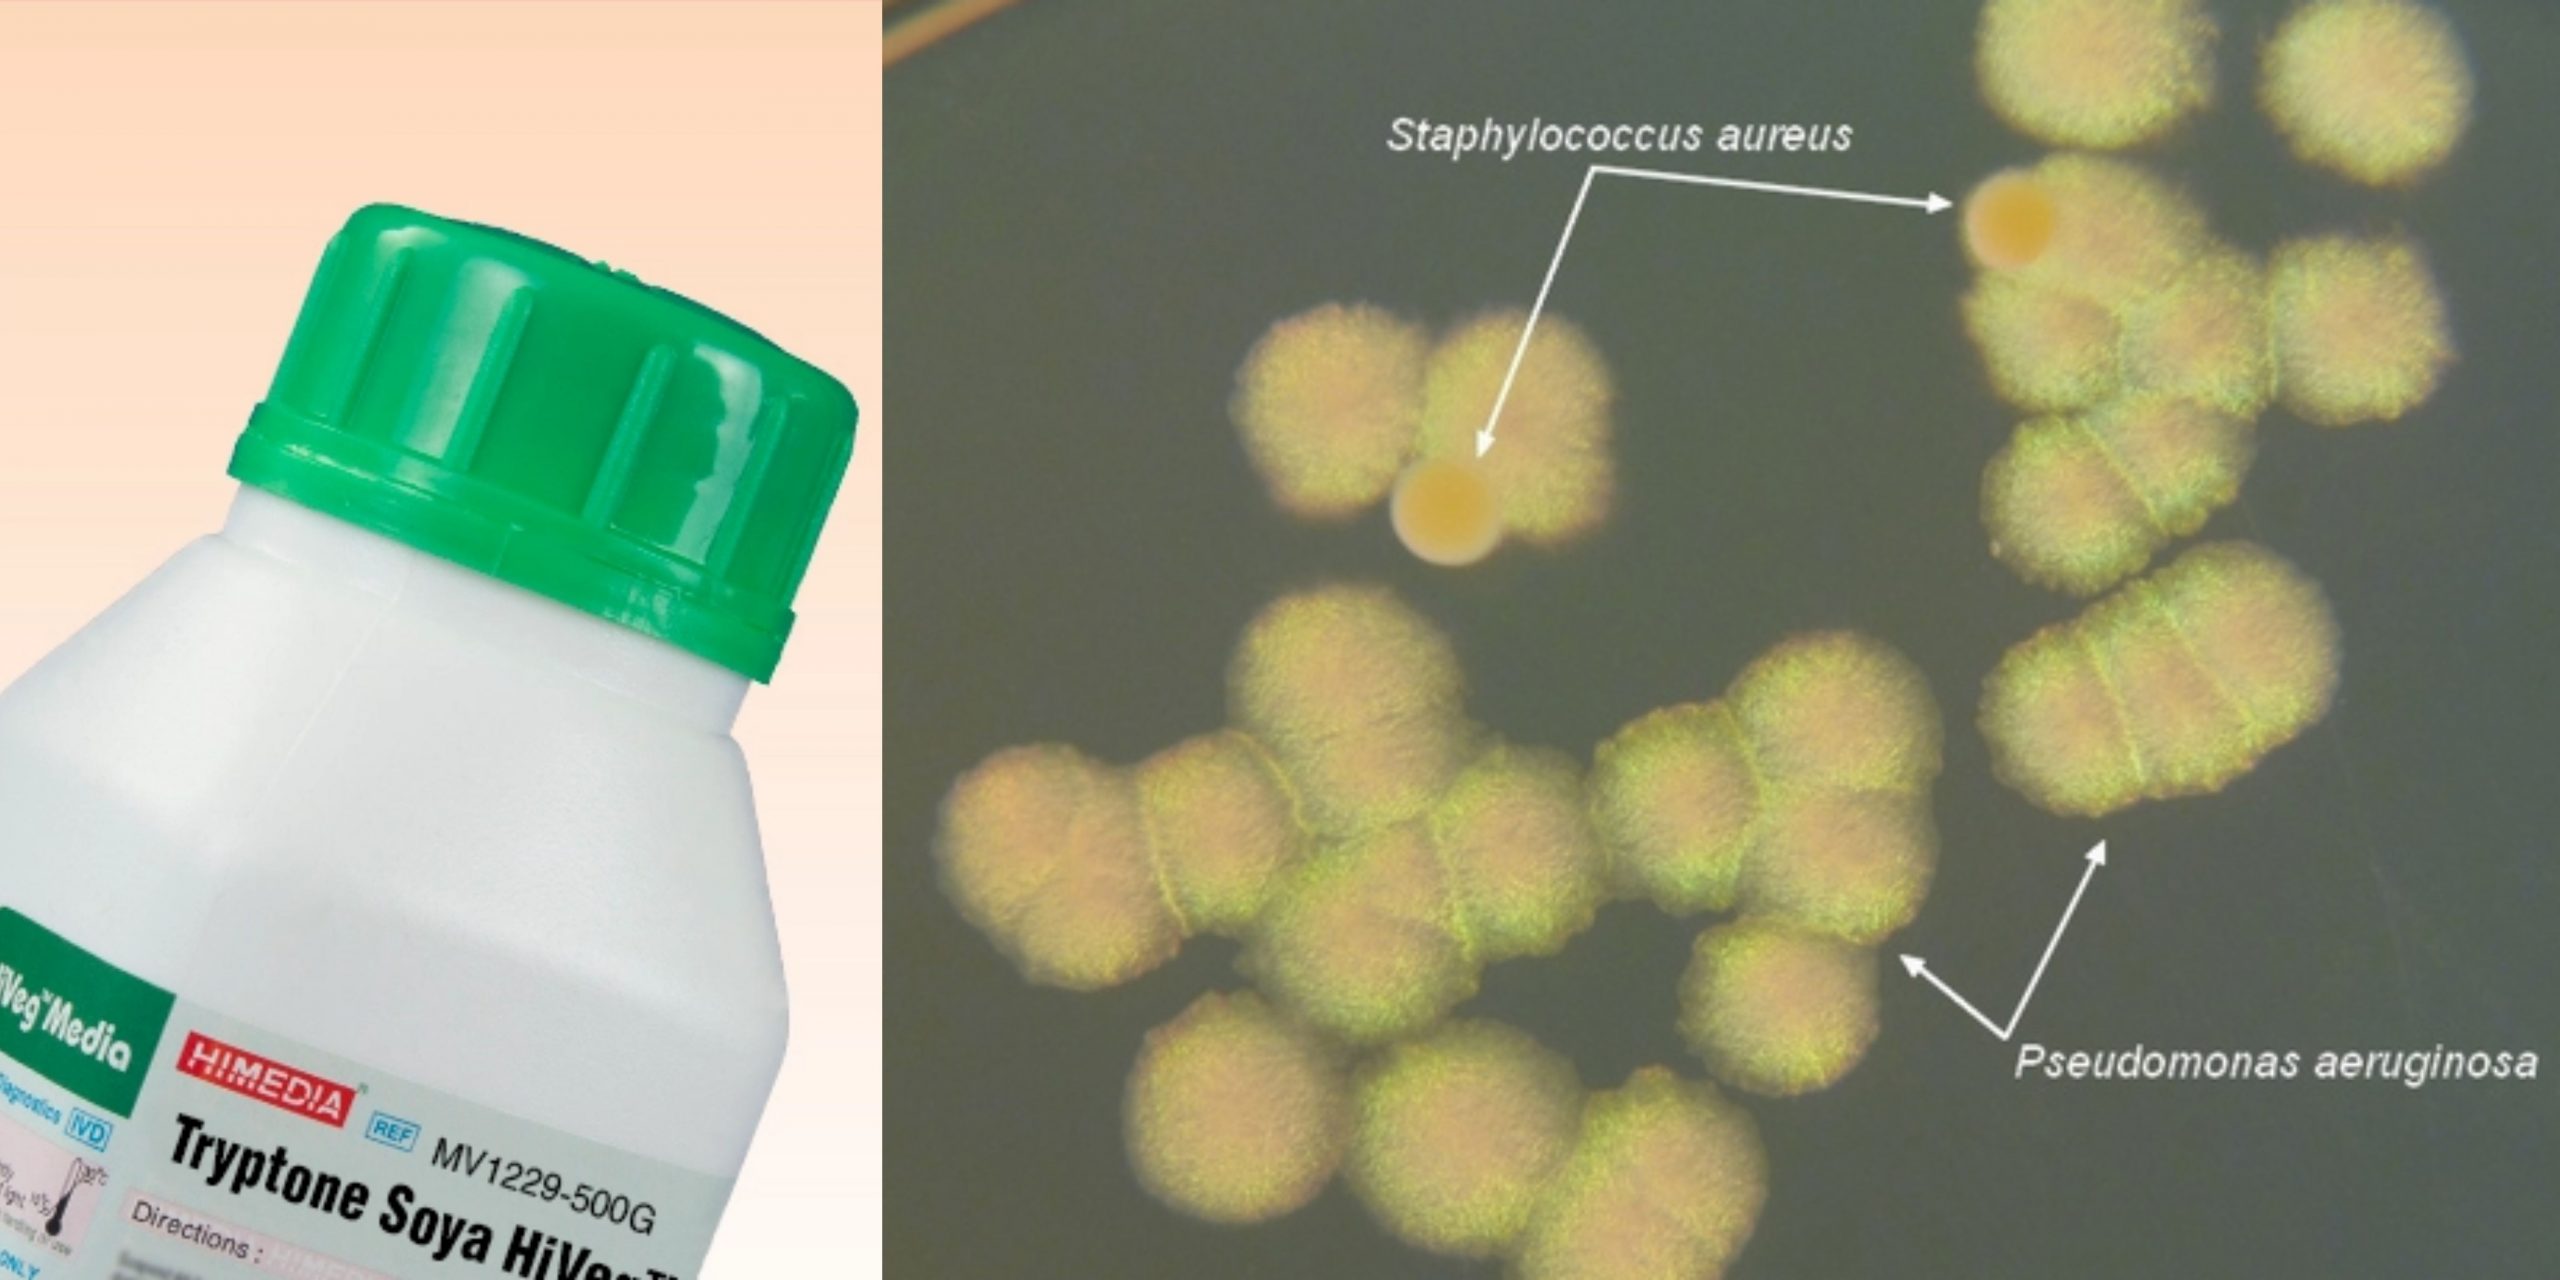 Tryptone Soya Broth for the enrichment of Staph. aureus